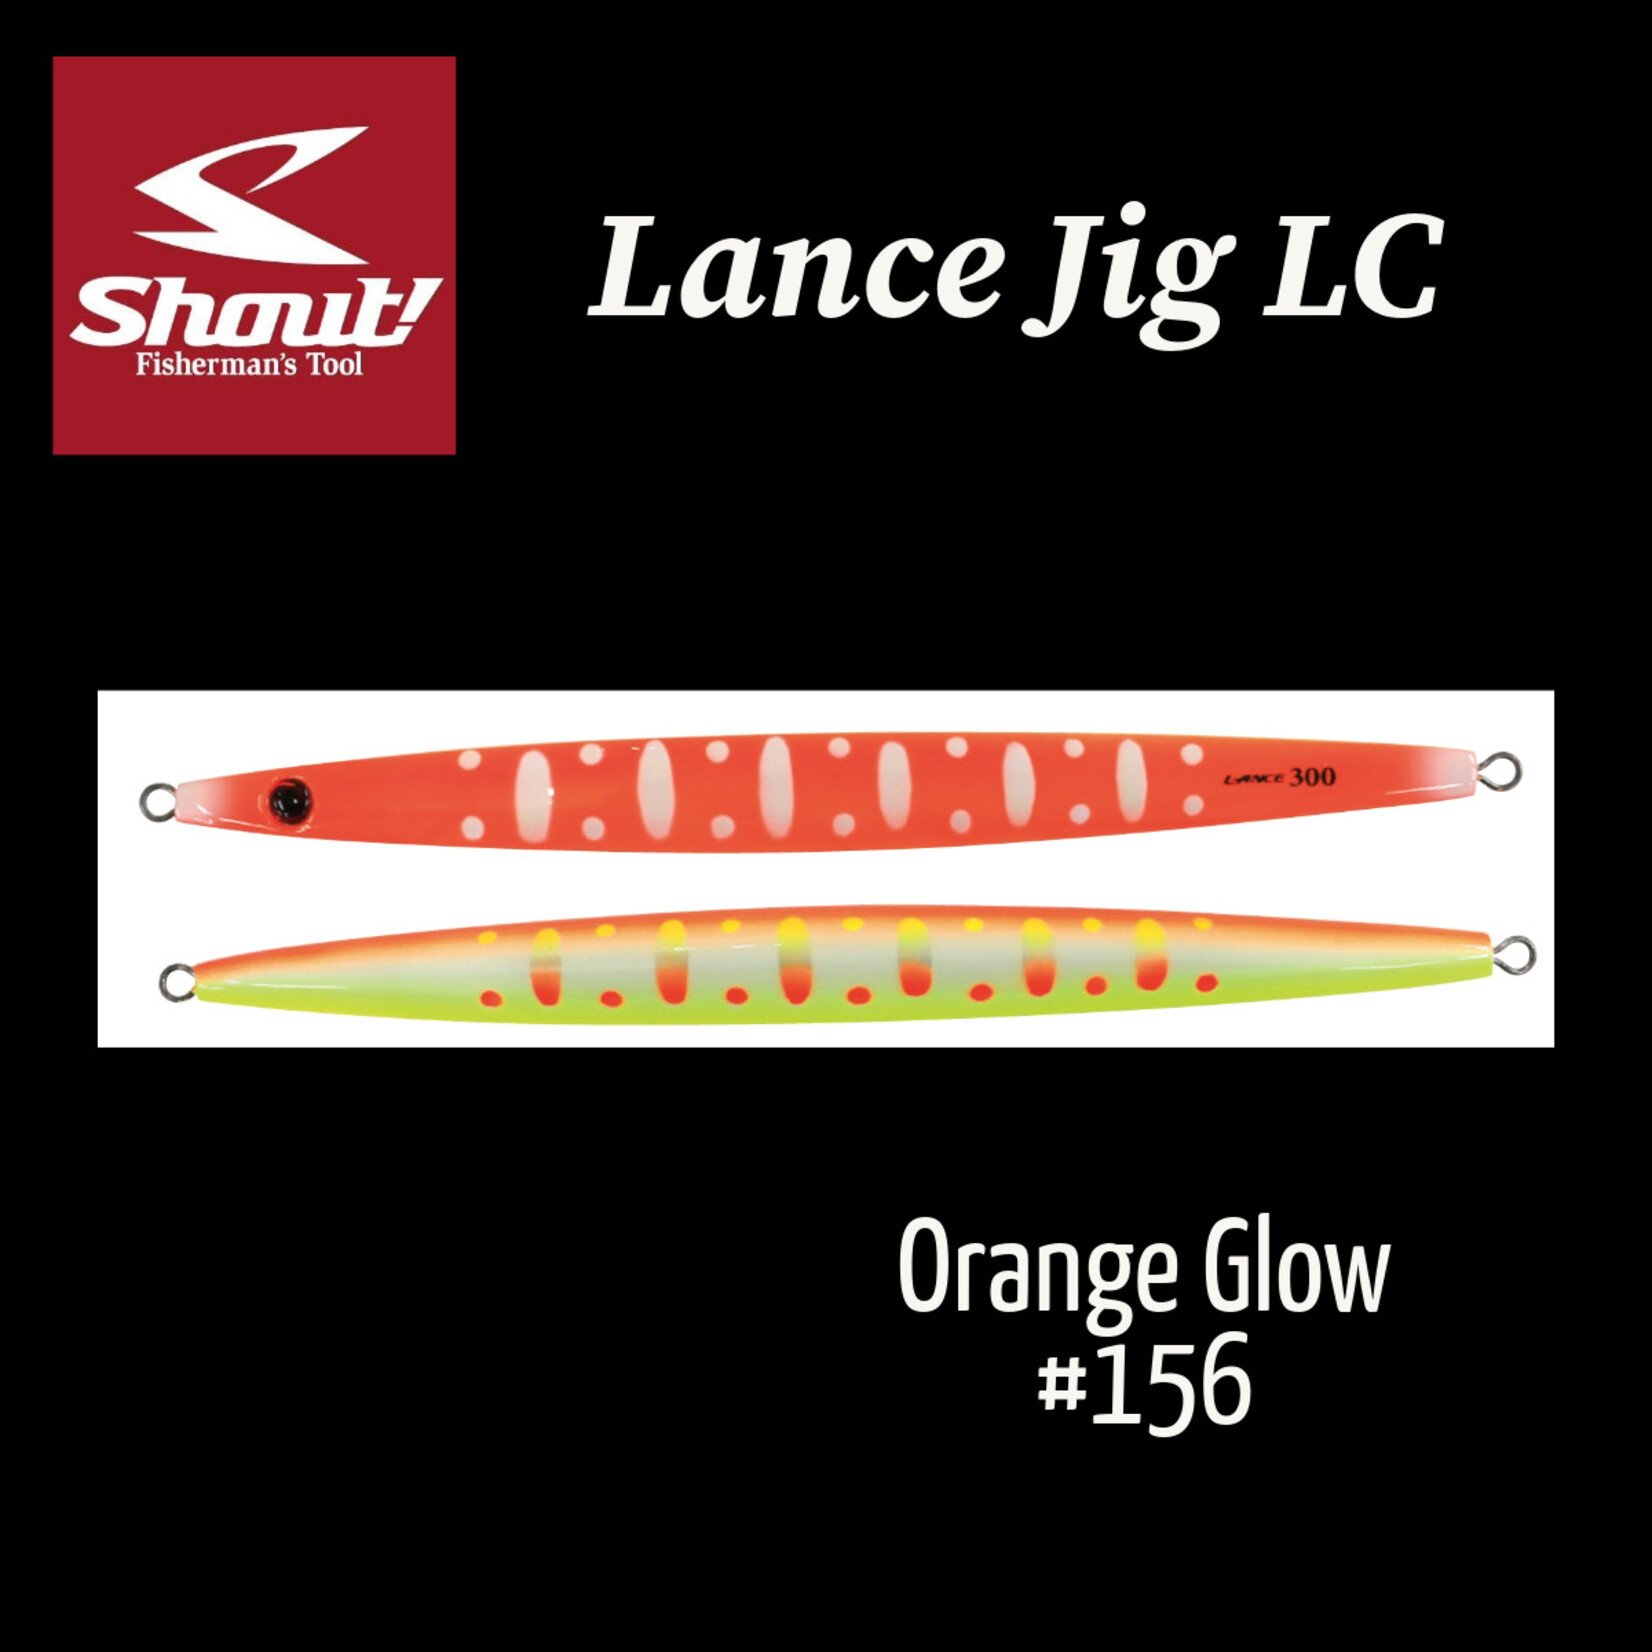 Shout! Lance Jig LC